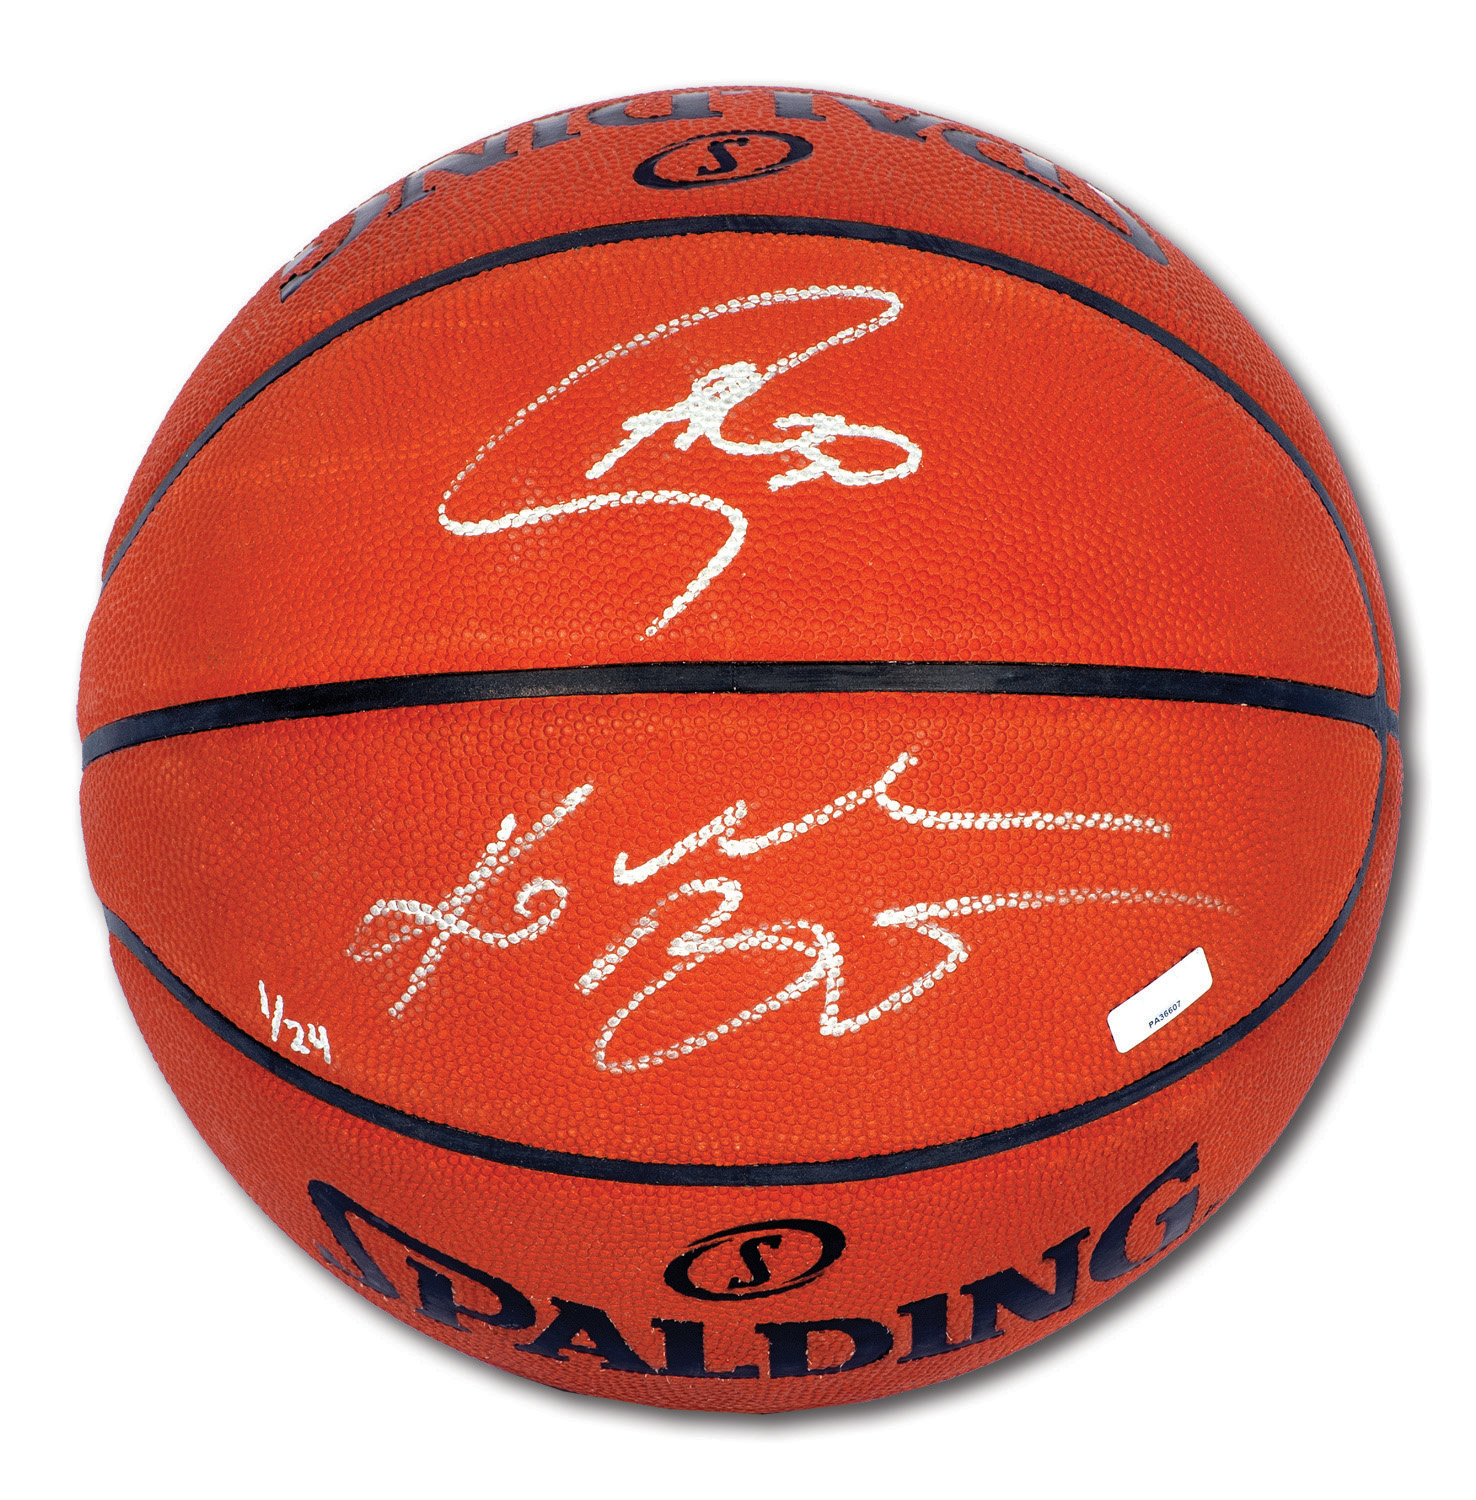 steph curry signed basketball